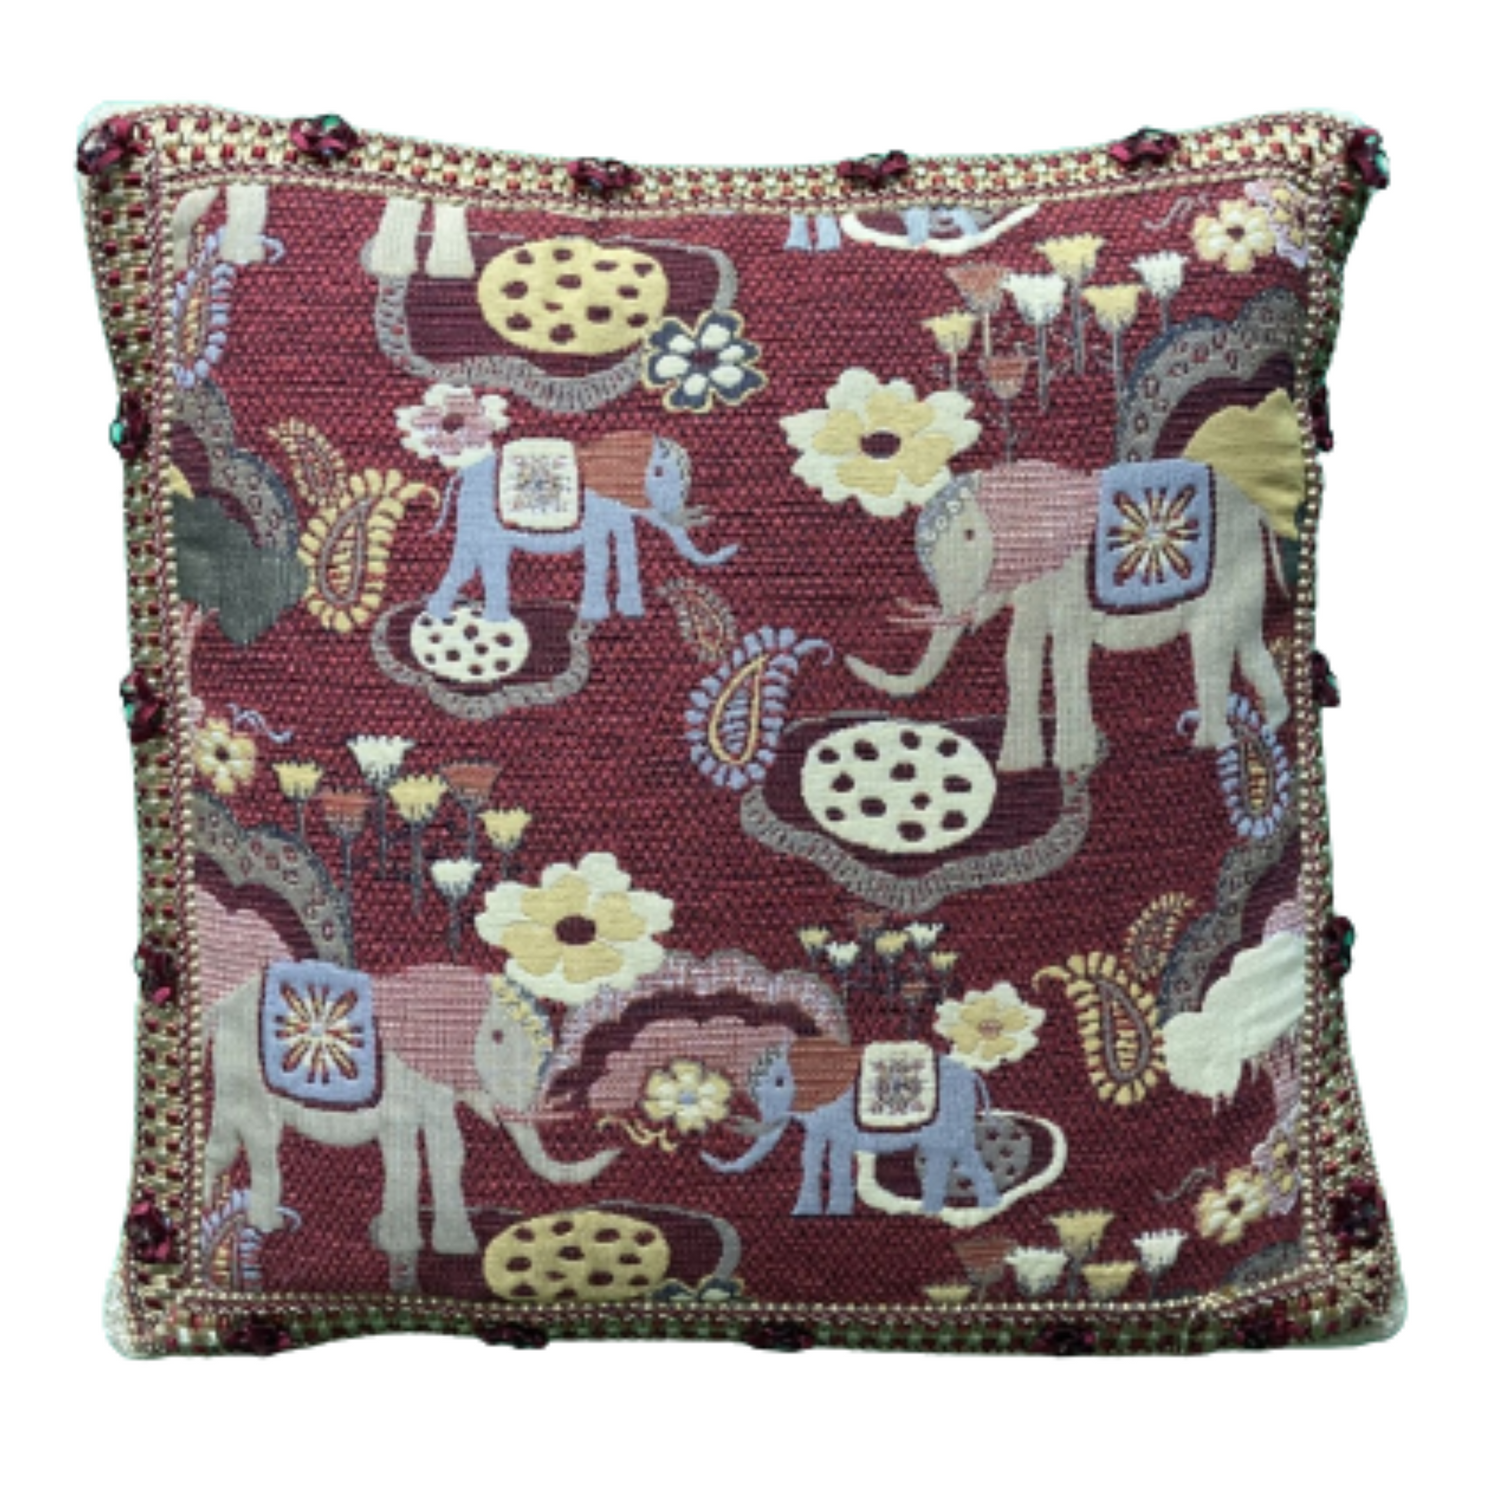 Maharaja Elephant 16 x 16 Square Decorative Pillow with Down Feather Insert